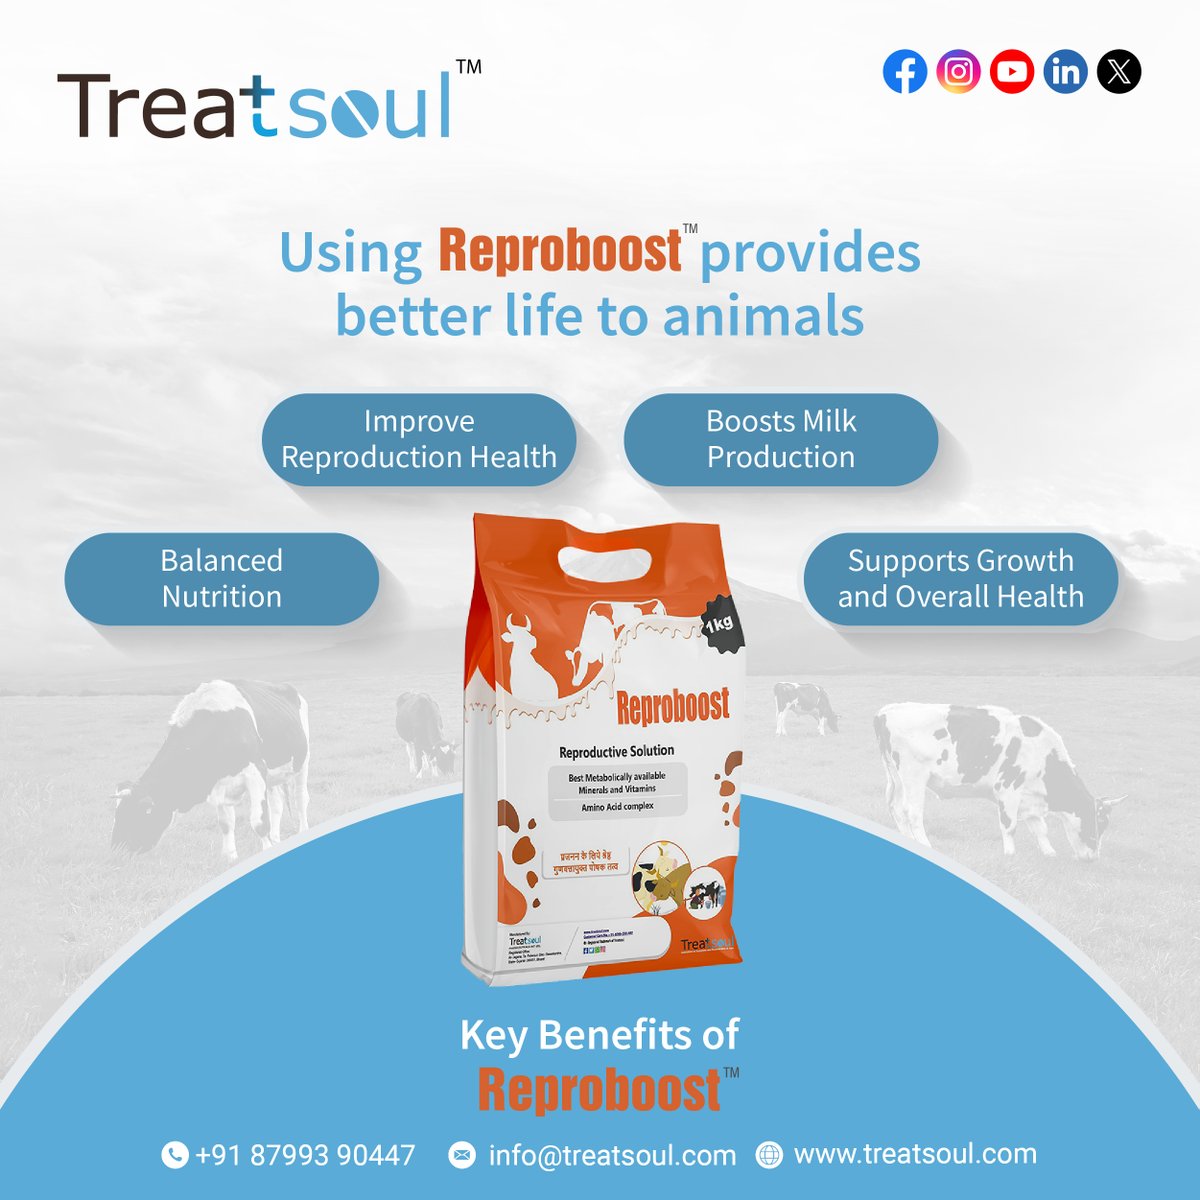 Experience the transformative power of Reproboost, a meticulously crafted nutrition solution designed to elevate every aspect of your animals' well-being.

#Reproboost #AnimalWellBeing #BalancedNutrition #ReproductiveHealth #MilkProduction #HealthyAnimals #treatsoulpharma